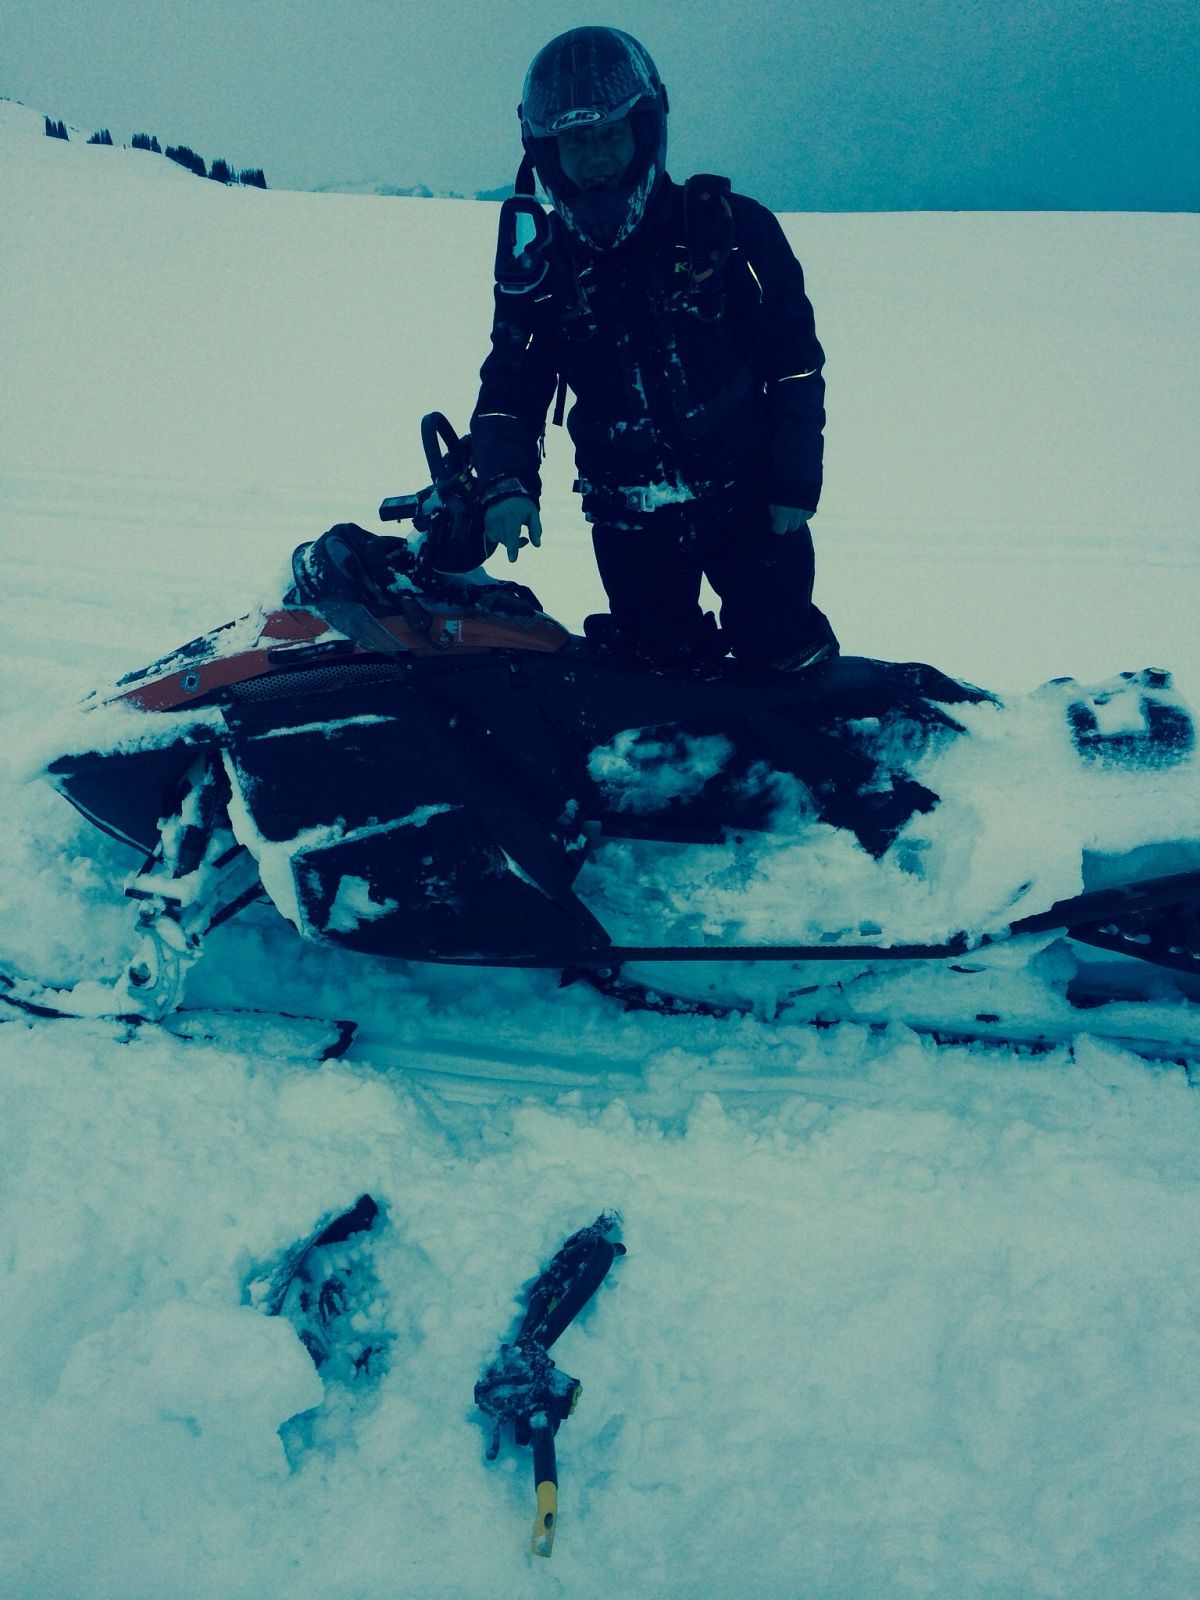 Found a sled under all the snow 